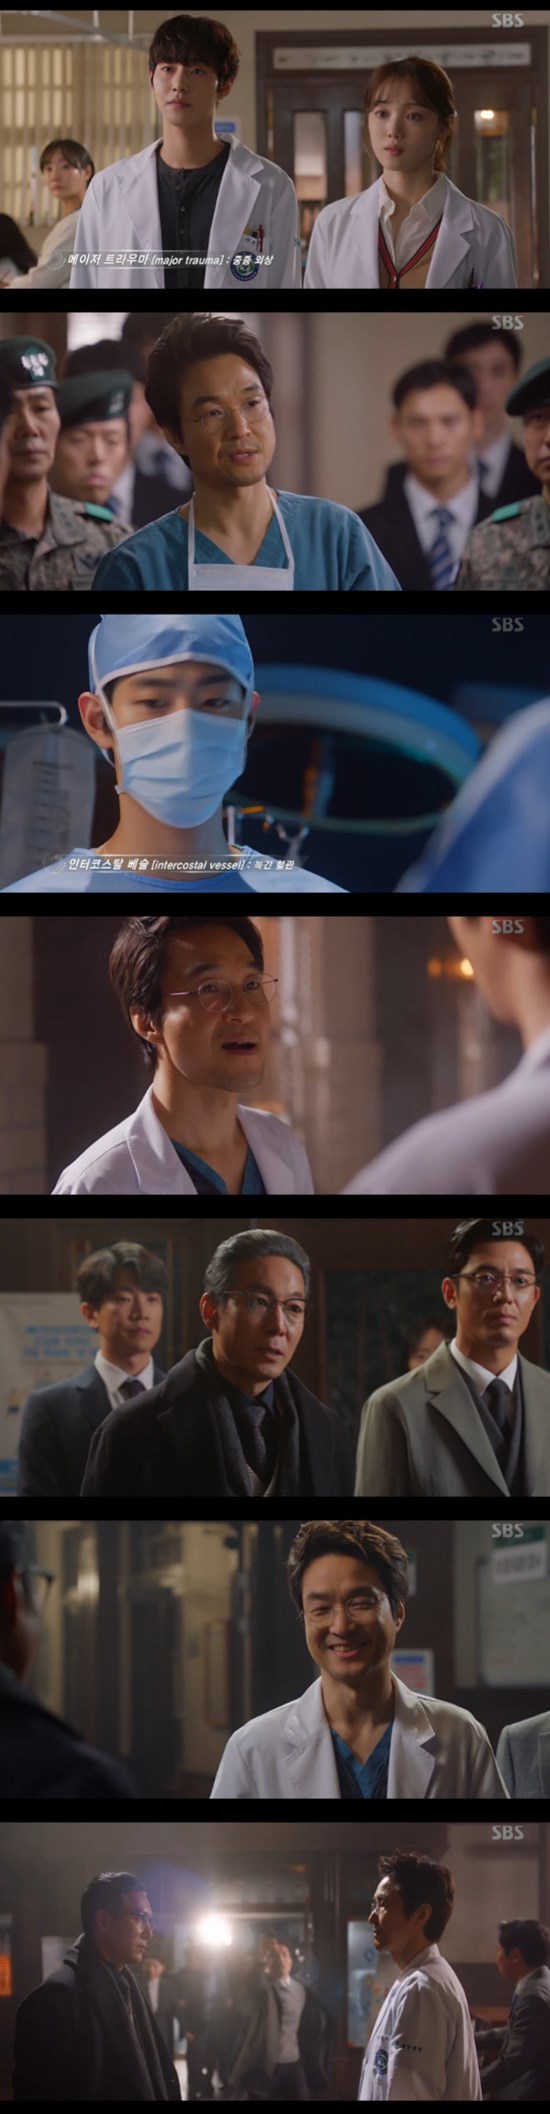 Seoul = = When Han Suk-kyu succeeded in the surgery of Korean Military Minister, Choi Jin-ho and Kim Joo-heon visited Doldam Hospital.In SBS Wolhwa Drama Romantic Doctor Kim Sabu 2 (playplayplay by Kang Eun-kyung/directed by Yoo In-sik), which was broadcast on the afternoon of the 7th, the image of Seo Woo Jin (Ahn Hyo-seop) in the second year of GS (surgery) fellow who had one week at Doldam Hospital was drawn.Han Suk-kyu ordered Seo Woo Jin to leave the hospital, saying that he needed to be a doctor.Then Seo Woo Jin asked himself to give him one Week time; in addition, Seo Woo Jin said, Im as confident as surgery.I will change the teachers words, he shouted, asking him to give 10 million won.Finally, at Doldam Hospital, the 4th year Yun Are-um (Shochu Yeon) of the CS (Thoracic Surgery) Fellow 2 year Cha Eun-jae (Lee Sung-kyung) and EM (Emergency Medicine) major will be together with Seo Woo Jin.At that time, a car accident occurred in Korea Military, and emergency patients entered Doldam Hospital. Seo Woo Jin and Cha Eun-jae started to take care of it with rapid power.The head nurse Oh Myung-sim (Jin Kyung-min) watched with meaningful eyes. Then Kim Sa-bu, who arrived, announced the start of the ministers surgery.Kim Sabu was told by the ministers doctor that the minister is suffering from angina and the surgery itself can be dangerous.As the operation began, Seo Woo Jin was surprised by Kim Sabus speed and the way he had never heard of it.Even in a big crisis, Kim led the surgery in a way that Seo Woo Jin could not understand.Seo Woo Jin thought this man was crazy when he saw Kim Sabu, who eventually succeeded in surgery.Seo Woo Jin was asked by Kim Sabu, who did not choose a safe method despite being a minister, and performed reckless surgery. Kim Sabu said, As long as I have done something and entered the operating room, I am only a patient.I put one in my head. I save it. I save it no matter what. Cha Eun-jae, who ran out of the operating room without being able to tolerate the depression, excused Kim Sa-bu for the sudden change, and also hid the fact that Cha Eun-jae was forced to dispatch because of the depression.Kim said to Cha Eun-jae, Do not come into my operating room in the future. Kim said to Cha Eun-jae, Do you have a job to kill people?If you will, stop beating the doctor, he shouted.Wounded Lee Sung-kyung wept as she expressed her sorrow at Yun Are-umYun Are-um, who soothed Lee Sung-kyung, found out that Lee Sung-kyung was not a forced dispatch but a scout for Kim Sabu.Kim Sabu knew that he was in the operating room and asked him to send him to Doldam Hospital.In addition, Kim noticed the pain of Seo Woo Jin, took medicine through other doctors and received medical treatment.At that time, Park Min-guk (Kim Joo-heon), Shim Hye-jin (Park Hyo-joo), Yang Ho-joon (Ko Sang-ho) and Do Yun-wan arrived at Doldam Hospital under the direction of Do Yun-wan (Choi Jin-ho).Park Min-kook informed him that Do Yun-wan had assigned all the authority of the minister to him. Do Yun-wan and Kim Sa-bu fought in a day-long dialogue toward each other.On the other hand, SBS Romantic Doctor Kim Sabu 2 is a drama depicting the story of real doctor in the background of a poor stone wall hospital in the province. It is broadcast every Monday and Tuesday at 9:40 pm.